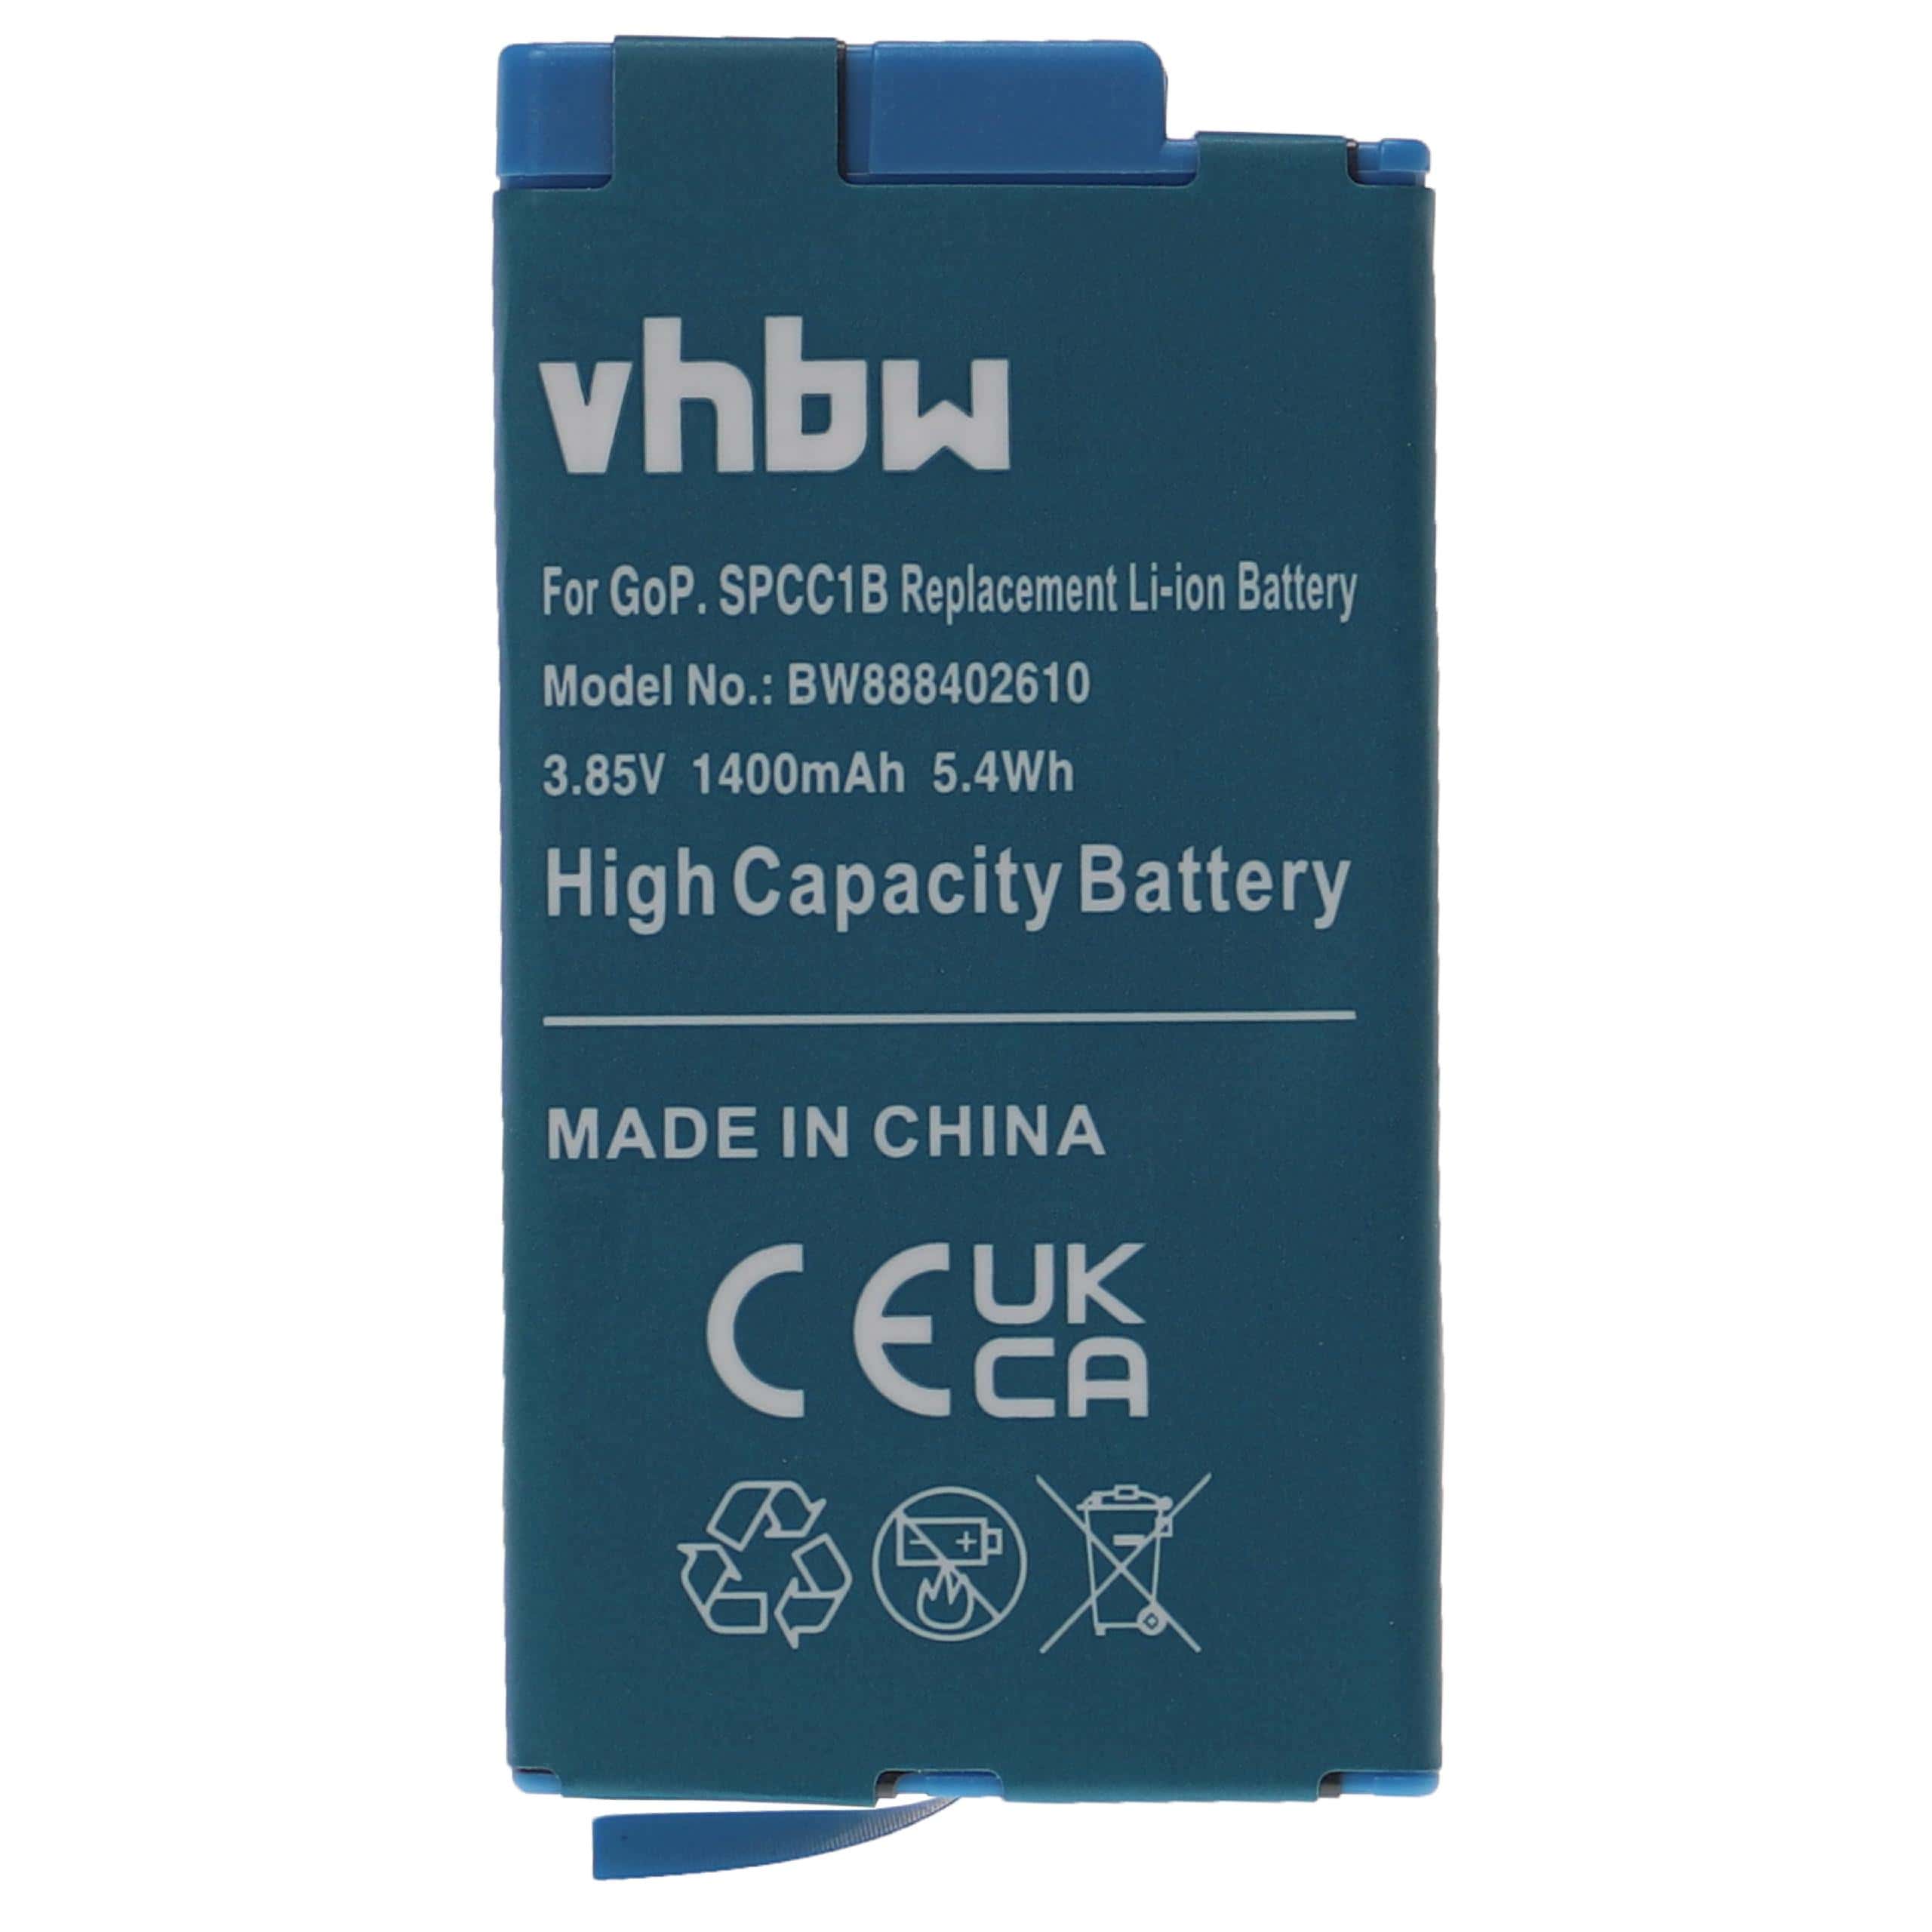 Videocamera Battery Replacement for GoPro 601-26762-000, SPCC1B - 1400mAh 3.85V Li-Ion